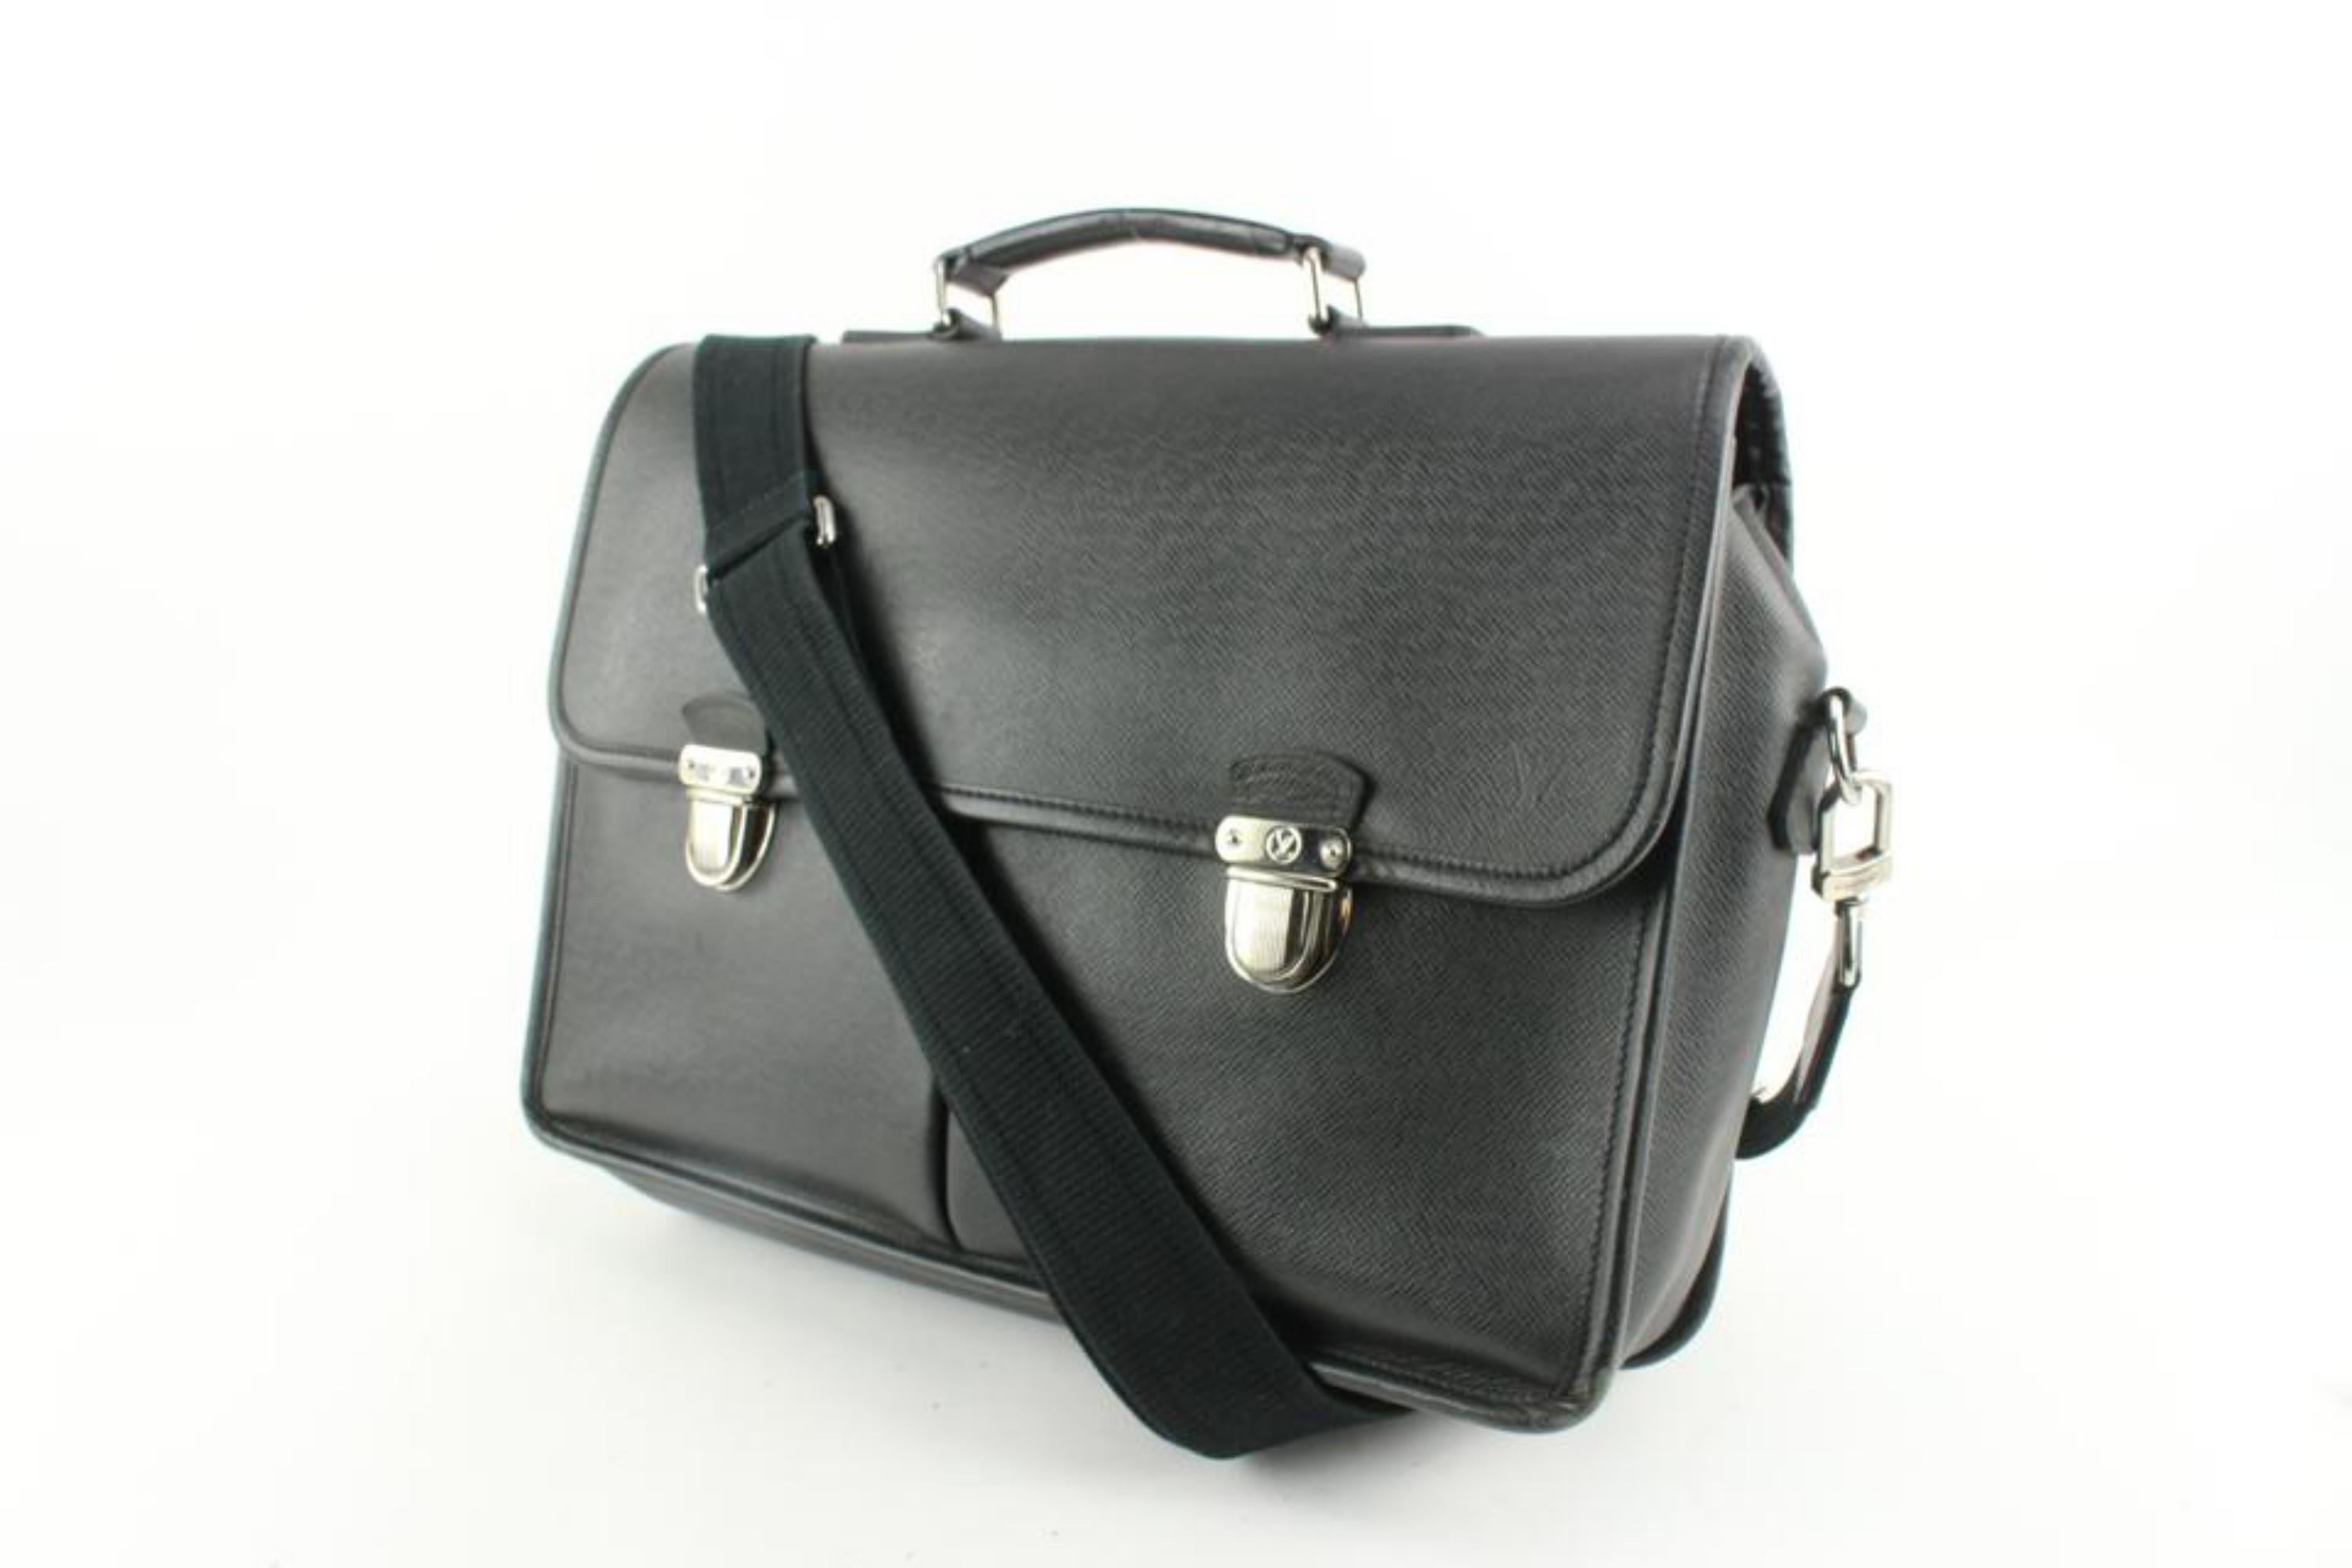 Louis Vuitton Black Taiga Leather 1224lv34
Date Code/Serial Number: MB5100
Made In: France
Measurements: Length:  15.75